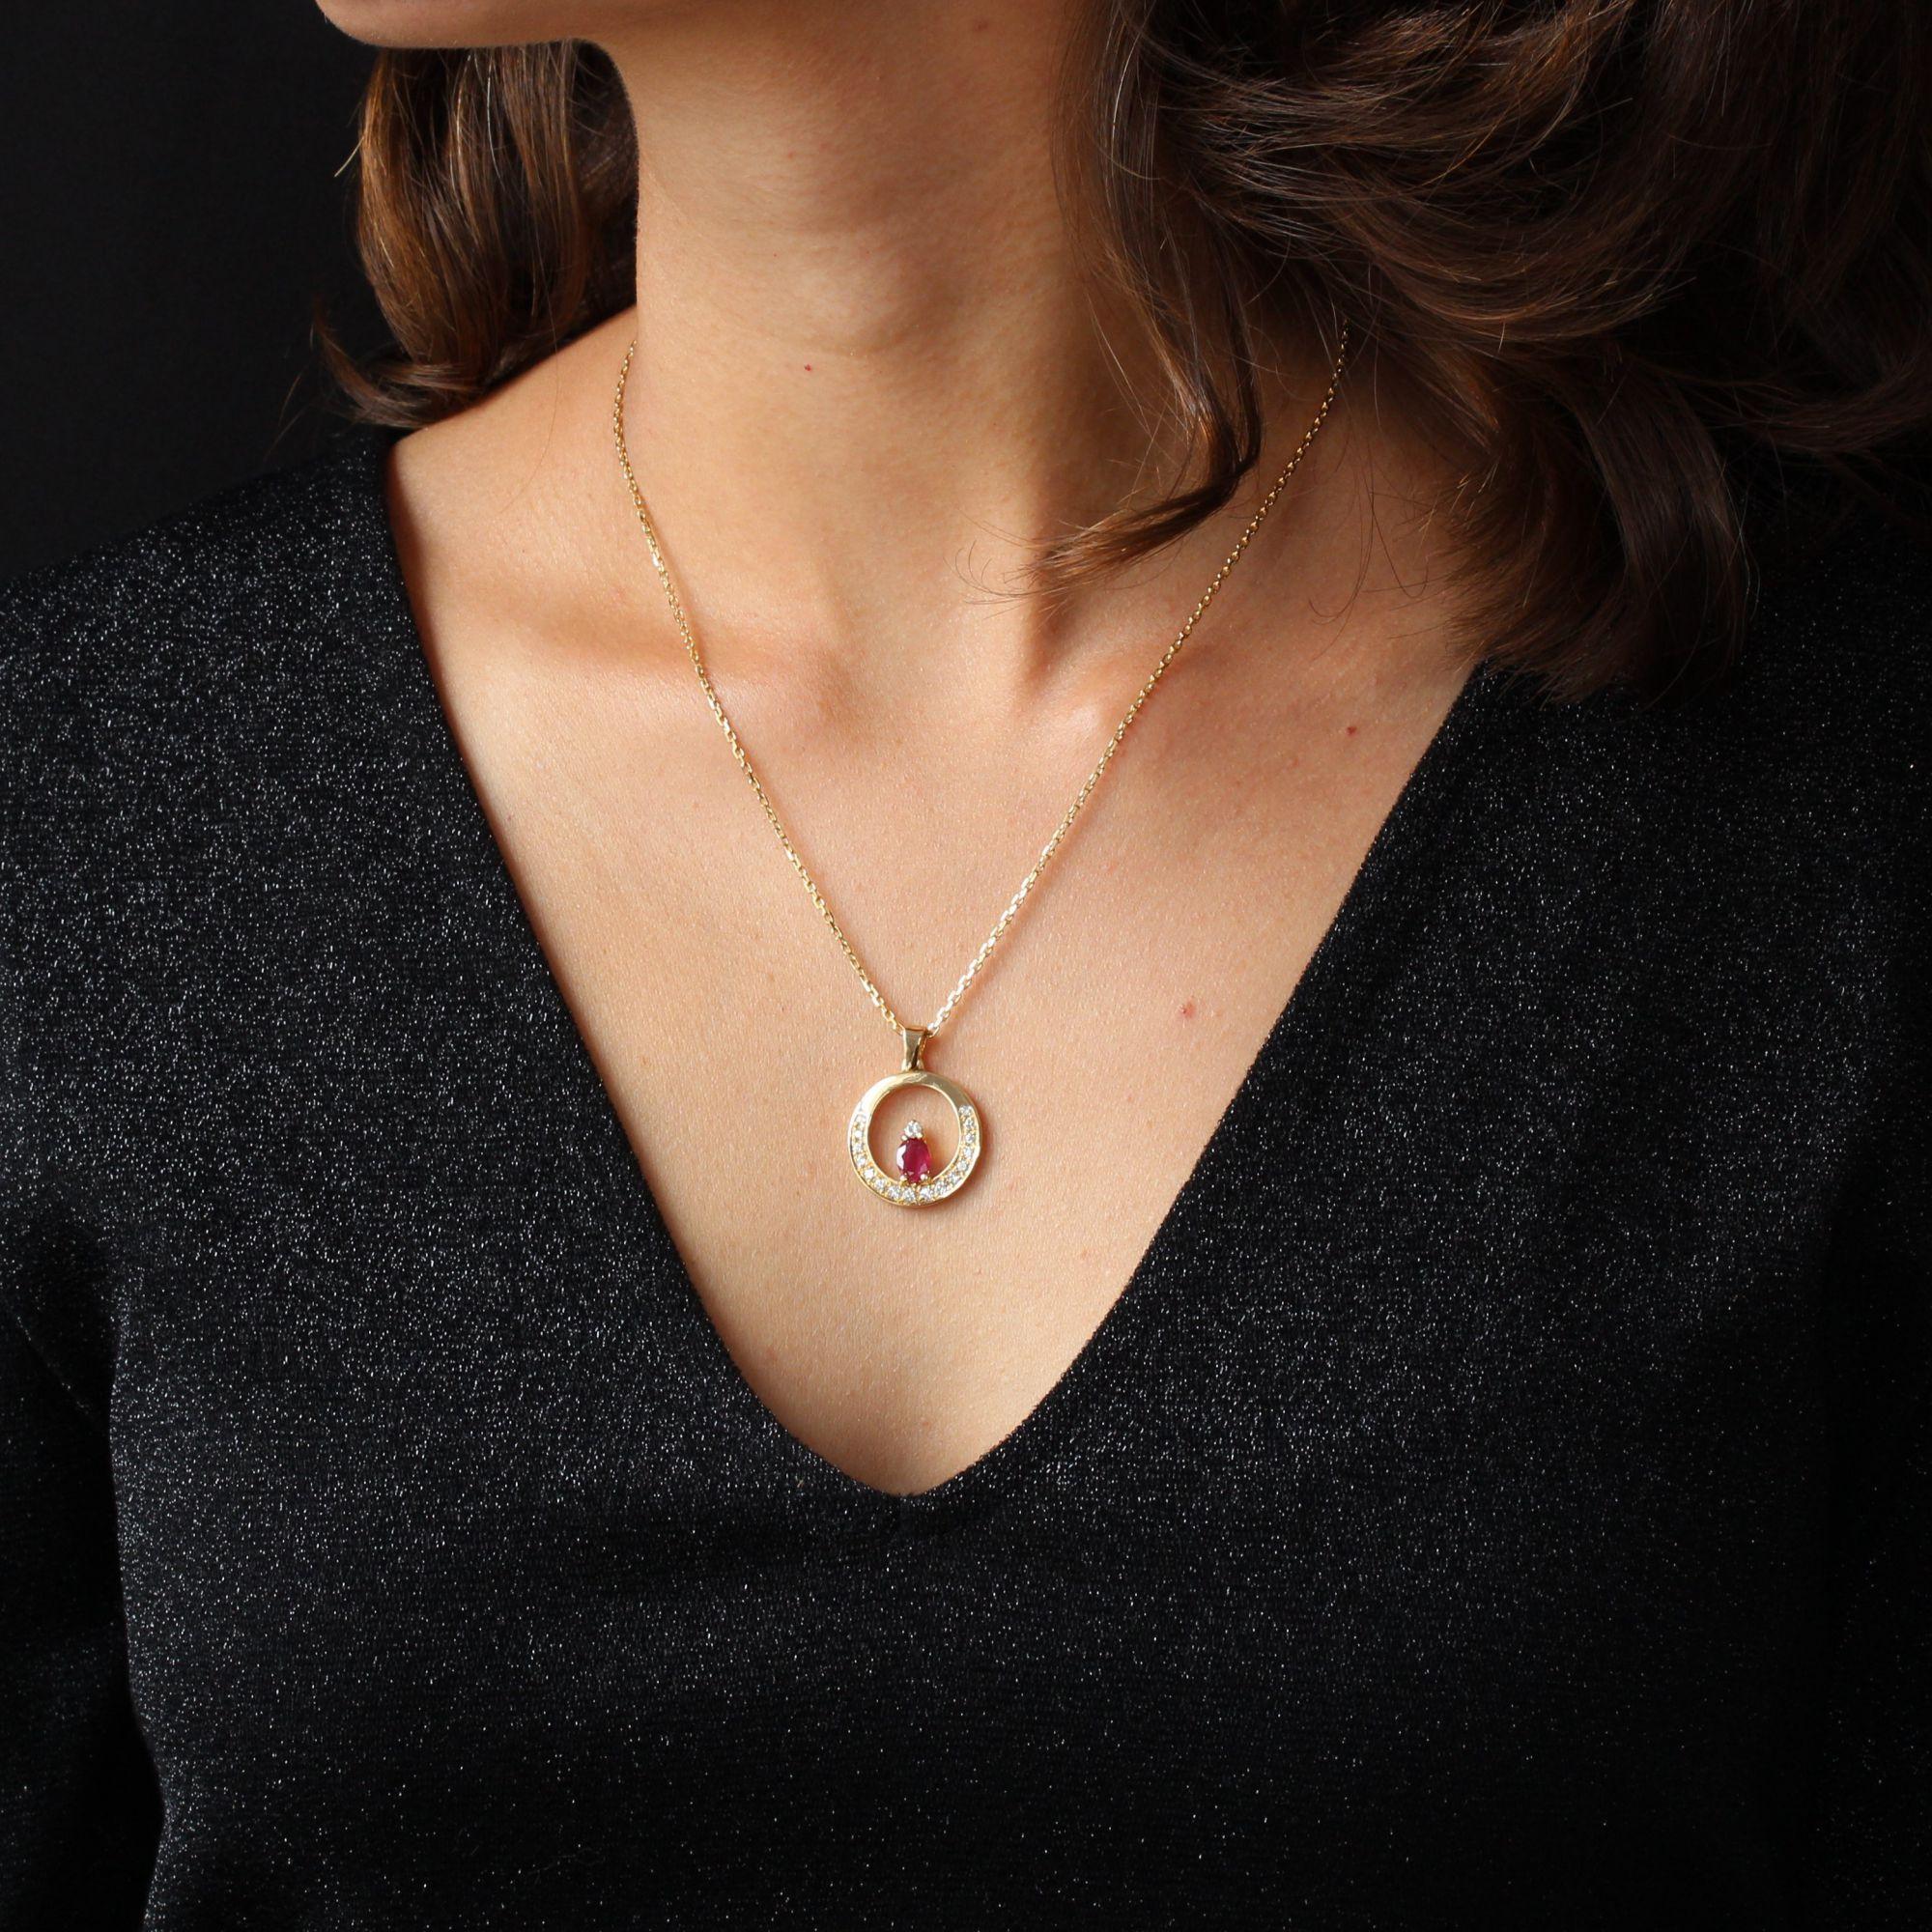 Pendant and its chain in 18 karat yellow gold, eagle head hallmark.
This round gold pendant is openwork in its center, set with modern brilliant-cut diamonds on 3/4 of its wire, and in its center an oval ruby is set with 4 claws, topped by a modern